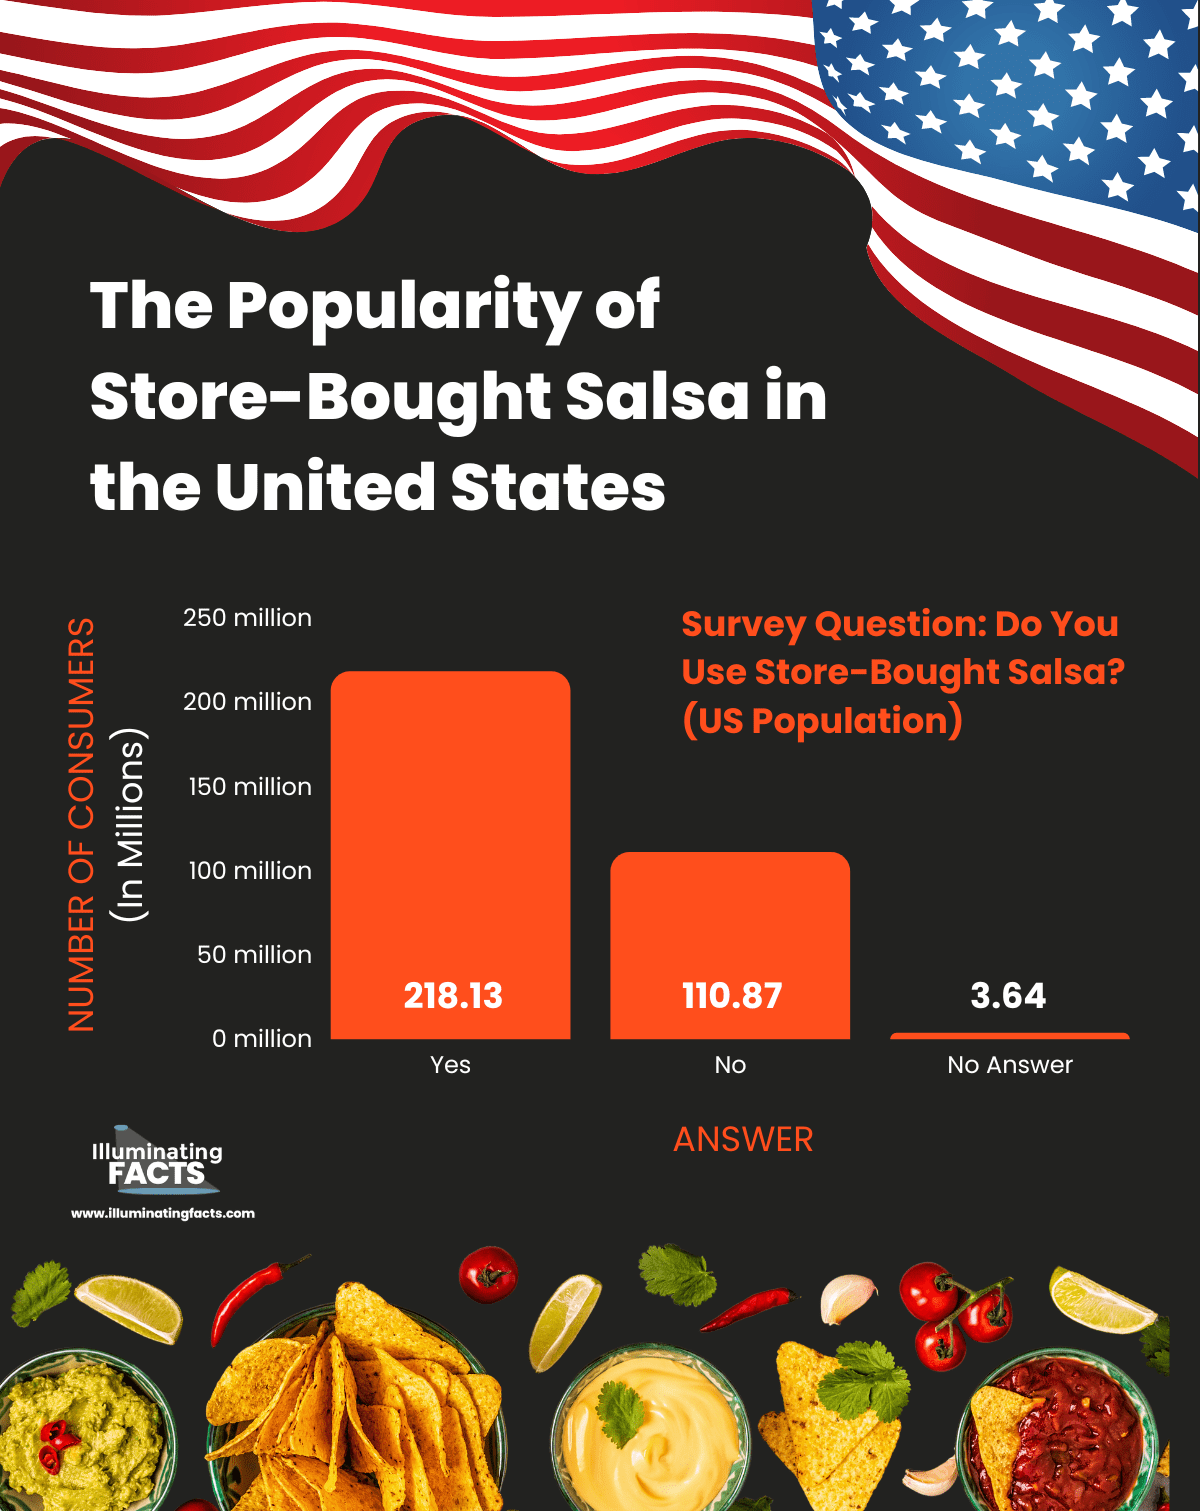 The Popularity of Store-Bought Salsa in the United States